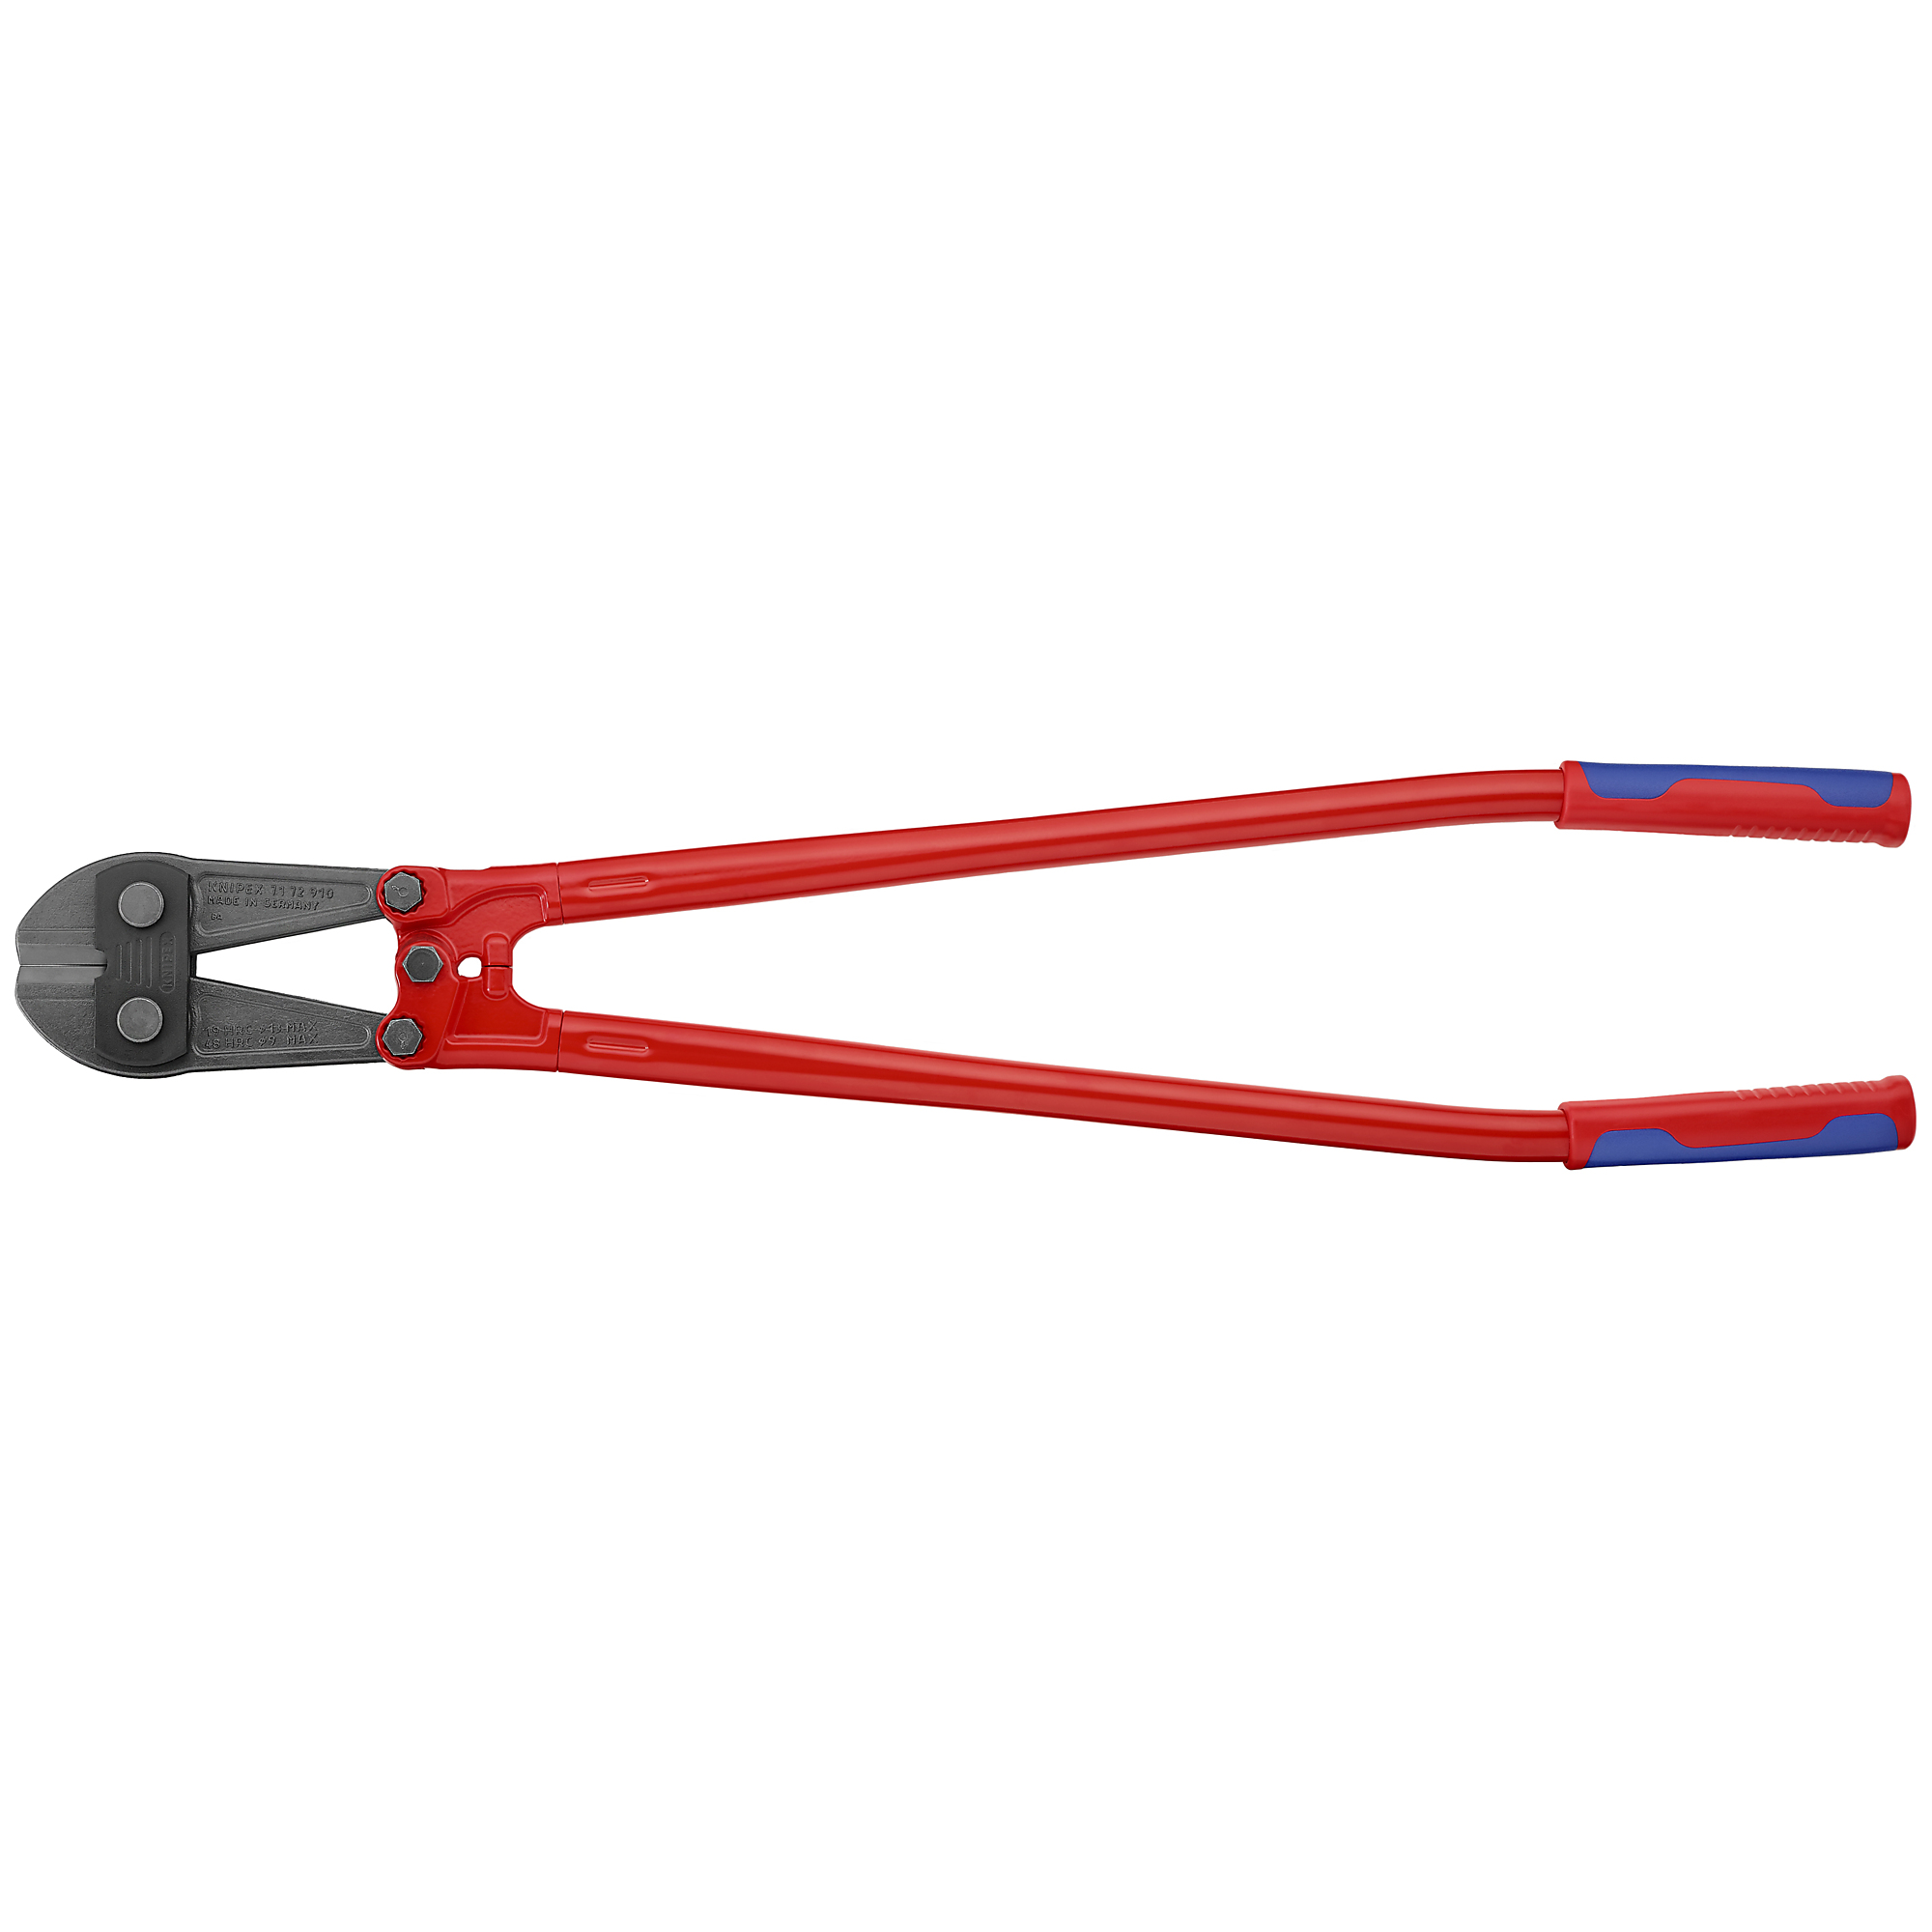 KNIPEX, Large Bolt Cutters, Comfort grip, 36.5Inch, Tool Length 36.5 in, Jaw Opening 0.88 in, Cutting Capacity 0.5 in, Model 71 72 910